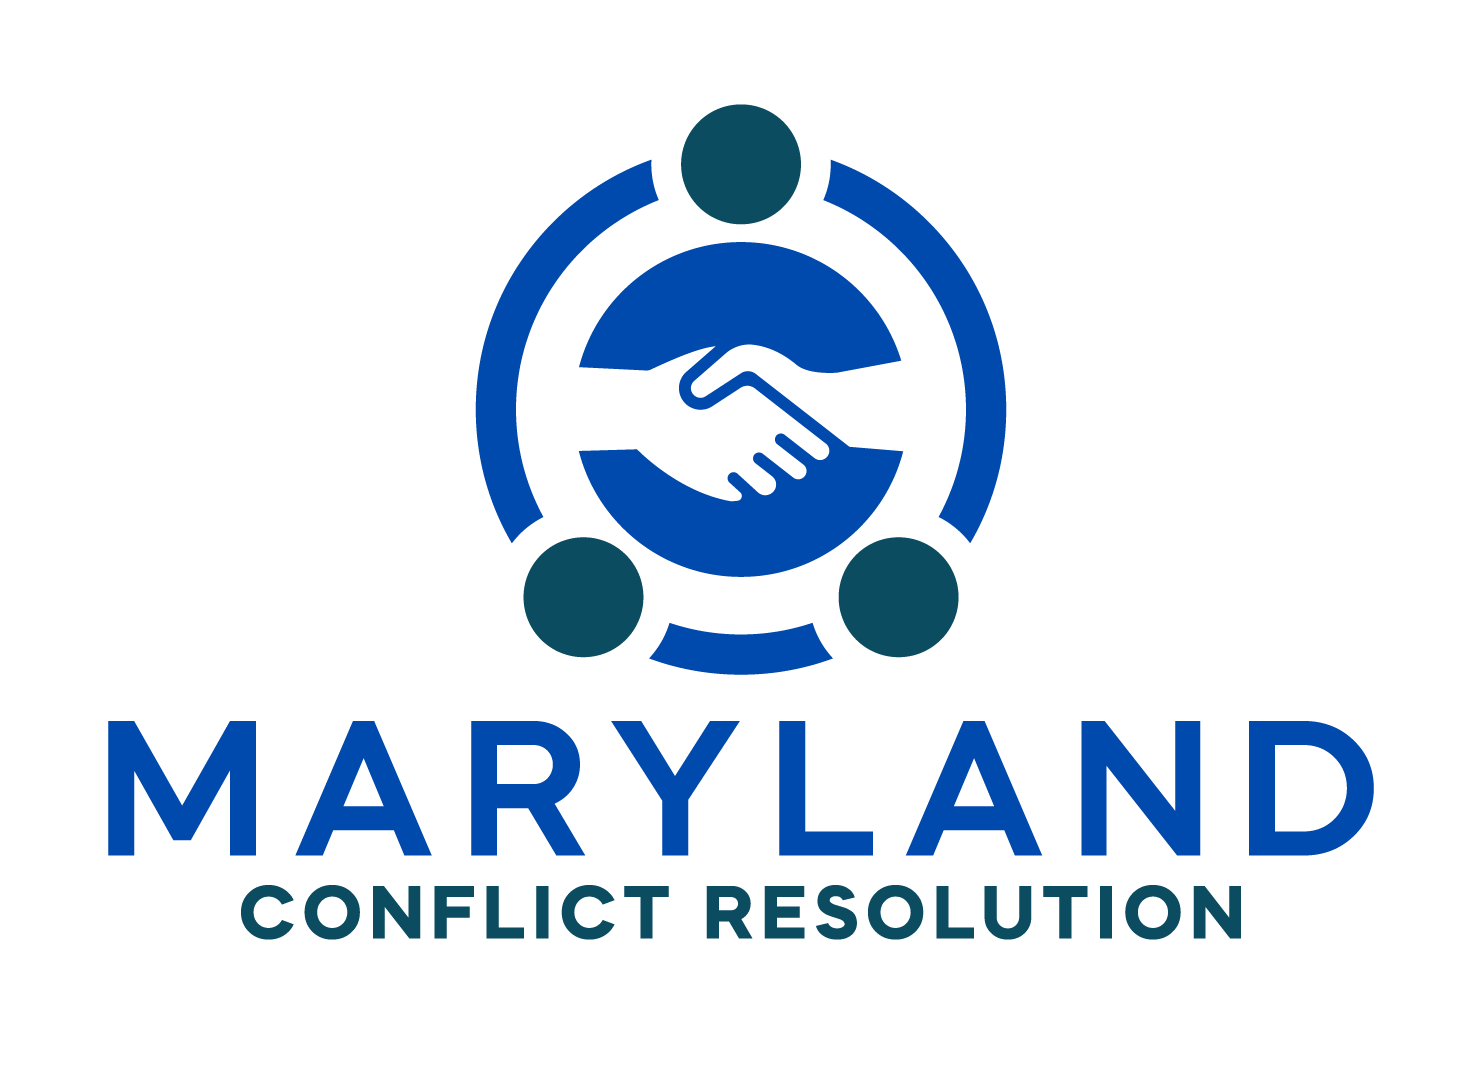 Maryland Conflict Resolution logo displayed in blue and white.